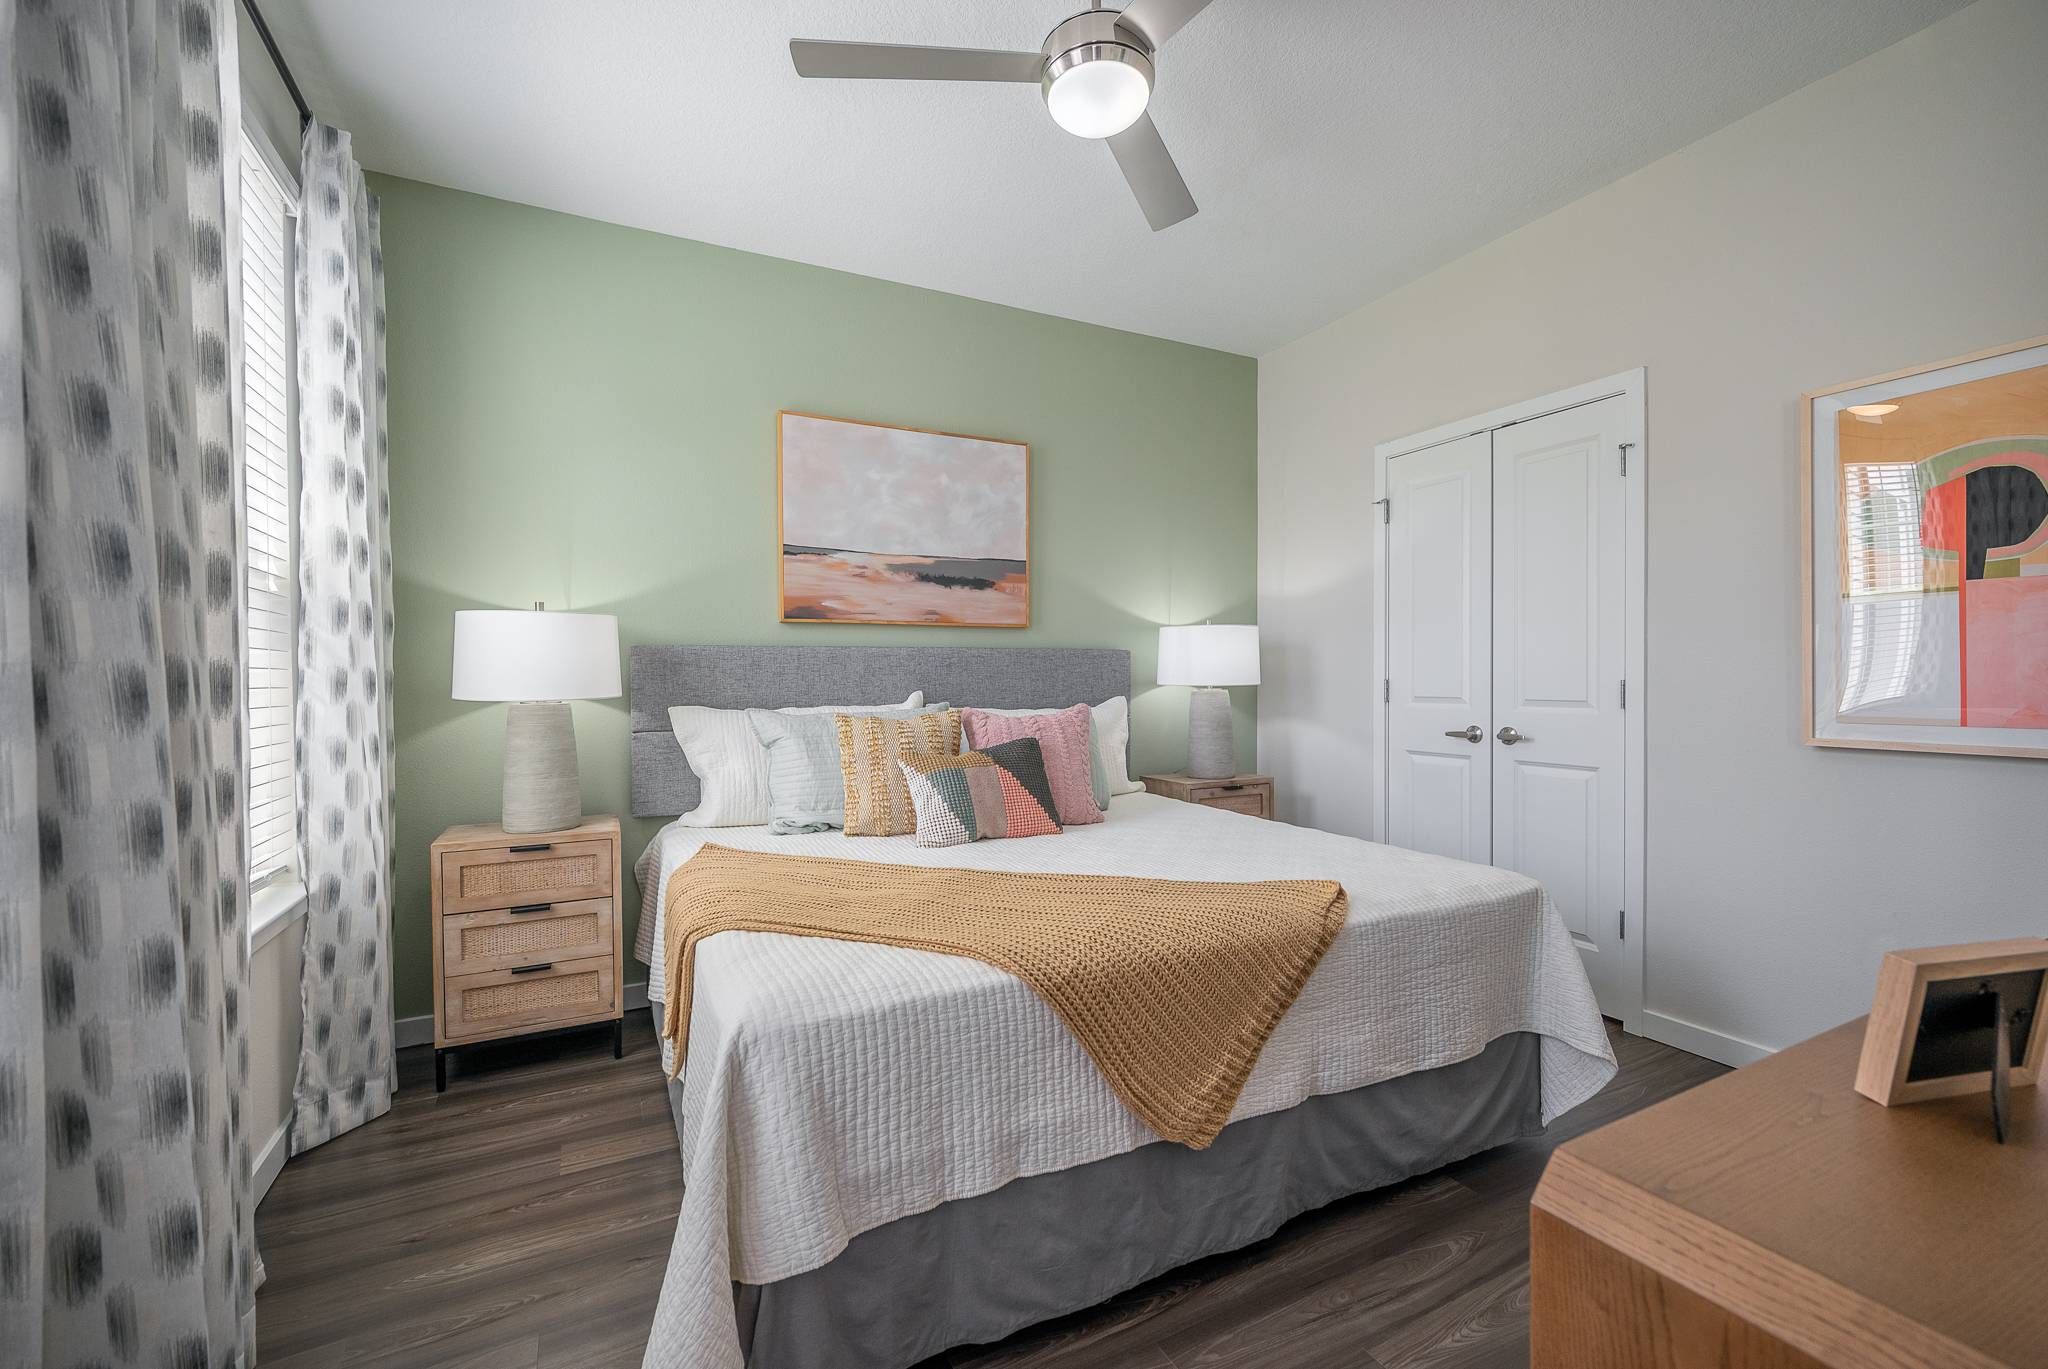 A serene bedroom with a green accent wall, queen-sized bed, and complementary wooden furniture at Alta at Horizon West.